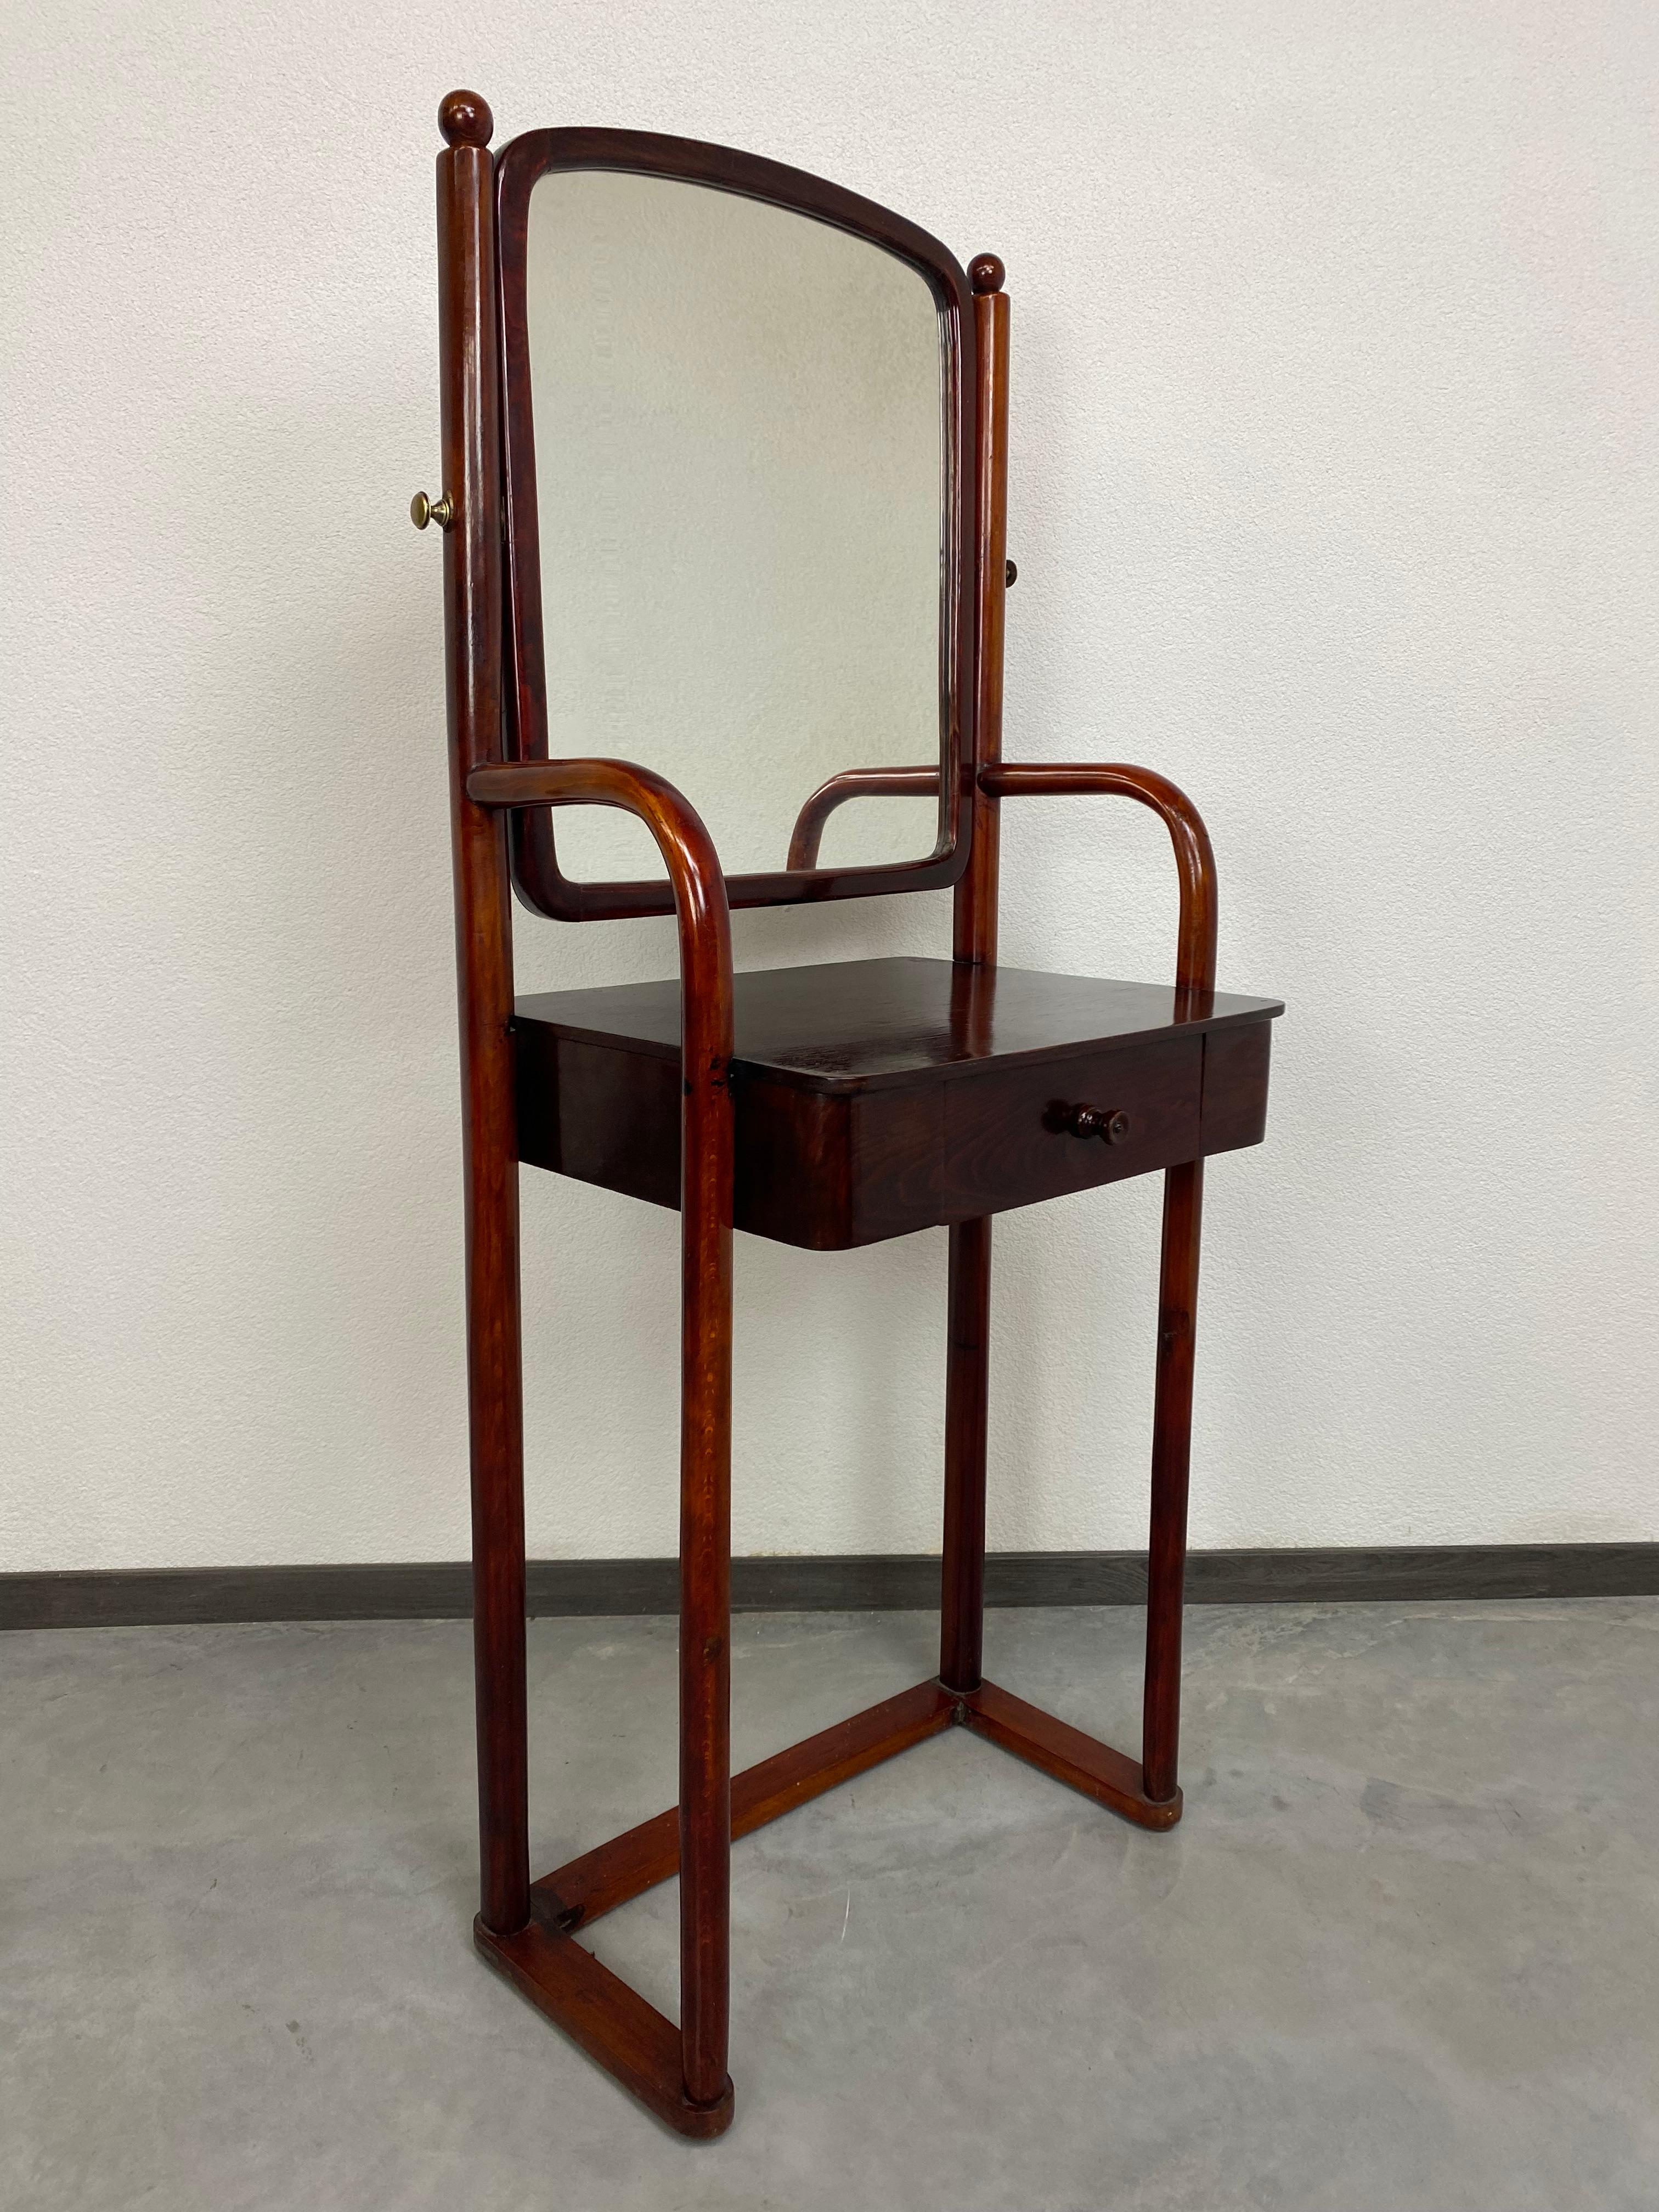 Dressing table No.1134 by Josef Hoffmann for J&J Kohn in very good original condition.